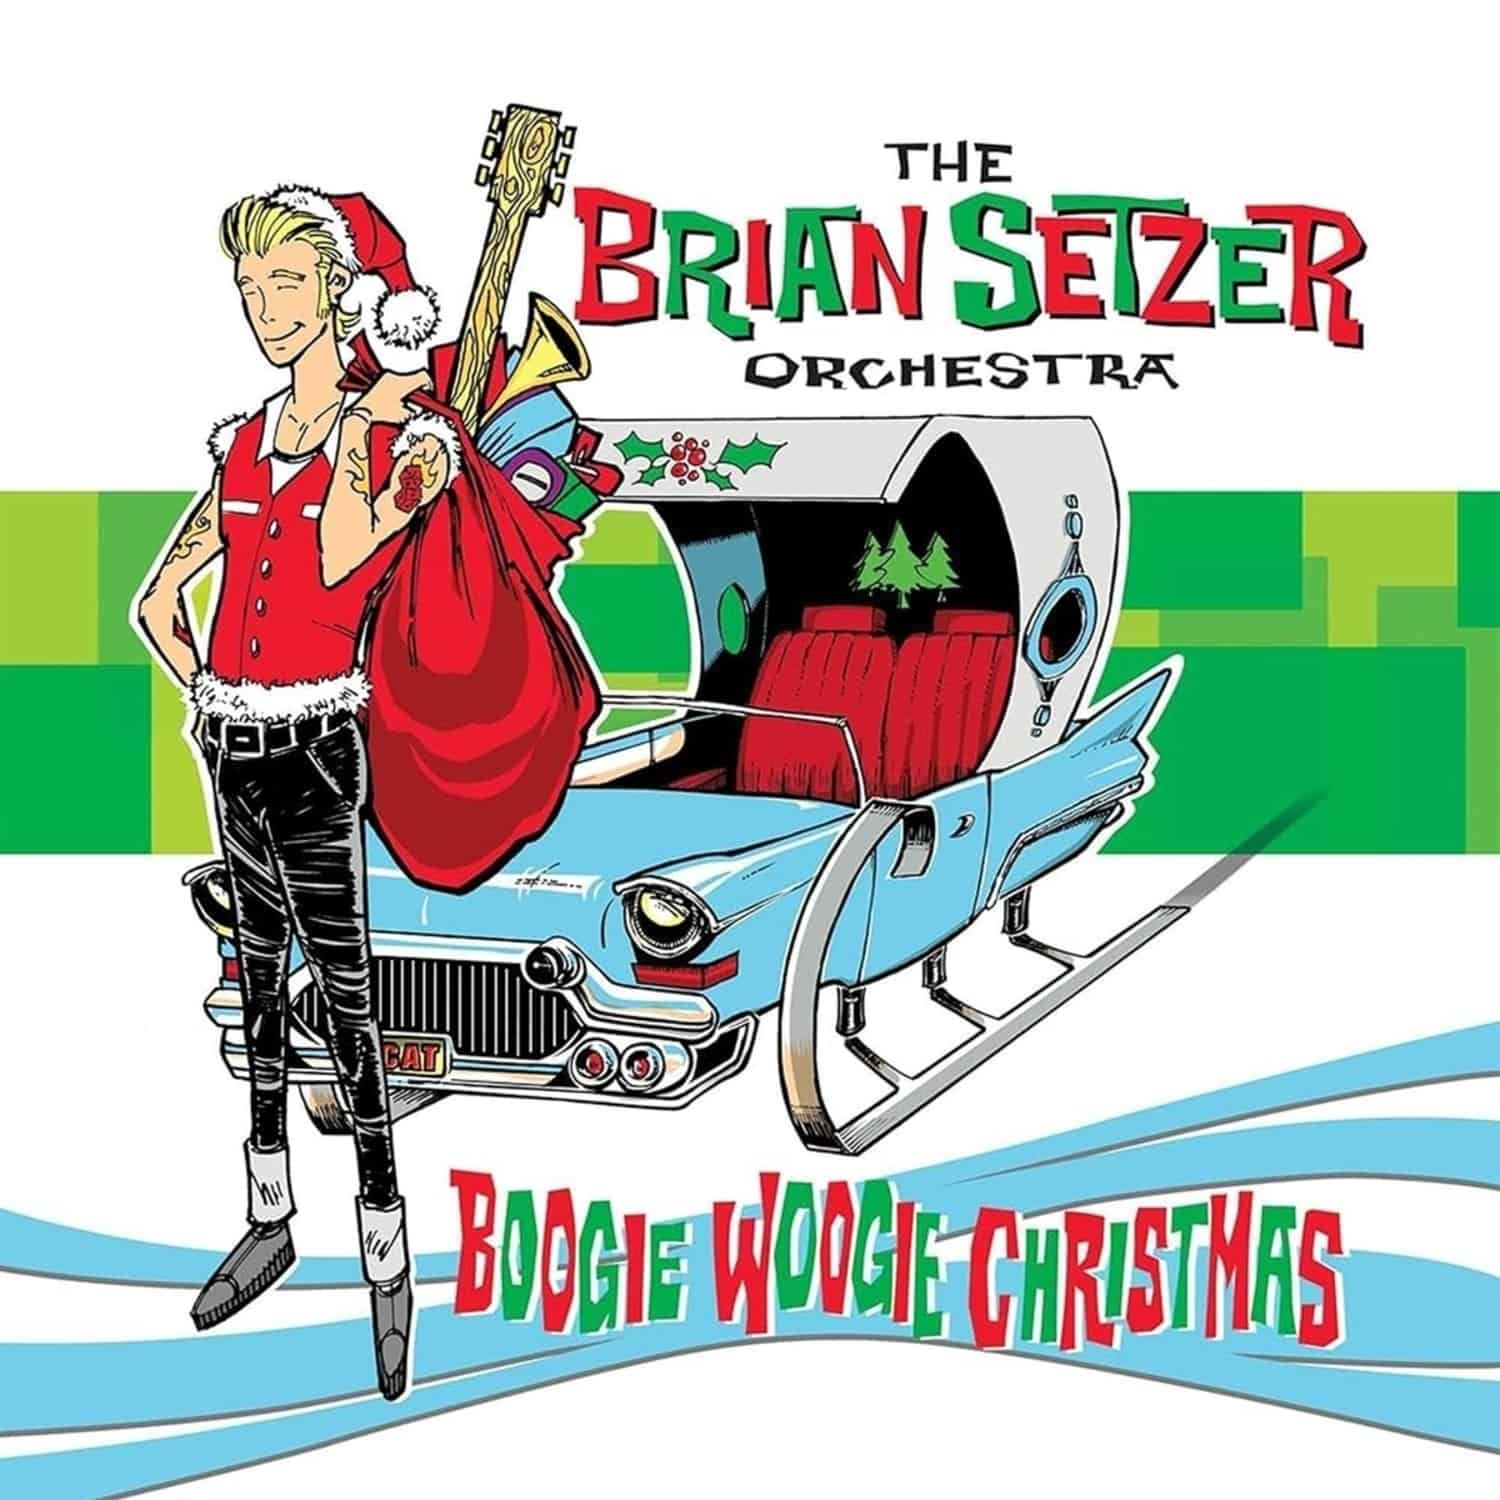 The Brian Setzer Orchestra - BOOGIE WOOGIE CHRISTMAS 